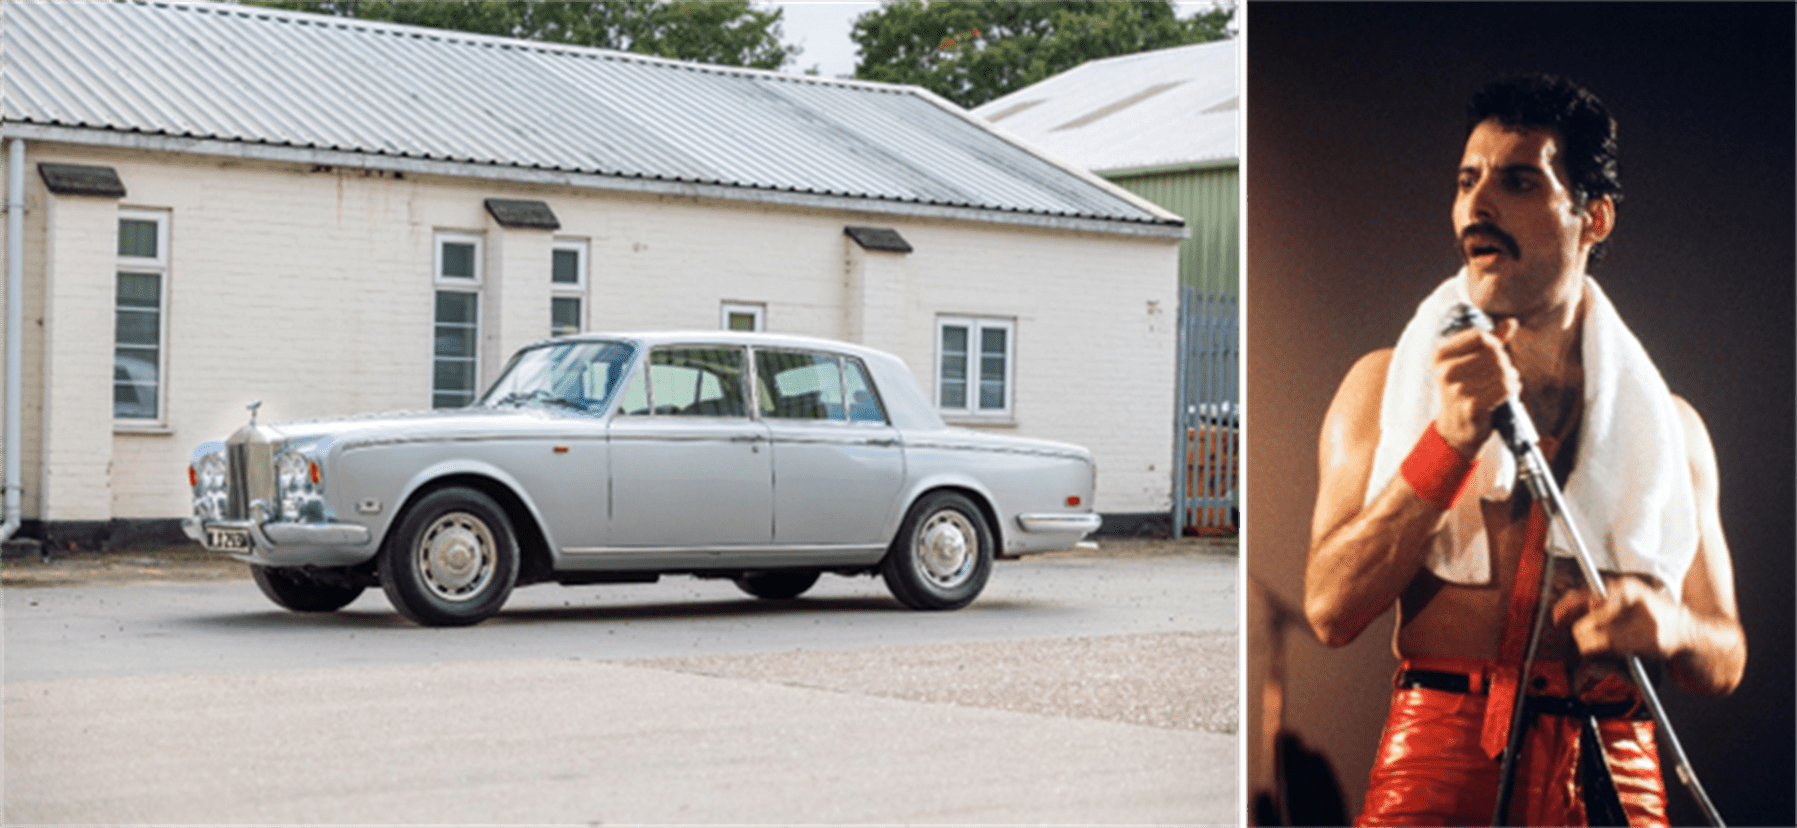 FREDDIE MERCURY’S PERSONAL 1974 ROLLS ROYCE SILVER SHADOW TO CROSS THE BLOCK, WITH ALL PROCEEDS TO BENEFIT THE SUPERHUMANS OF UKRAINE CHARITY